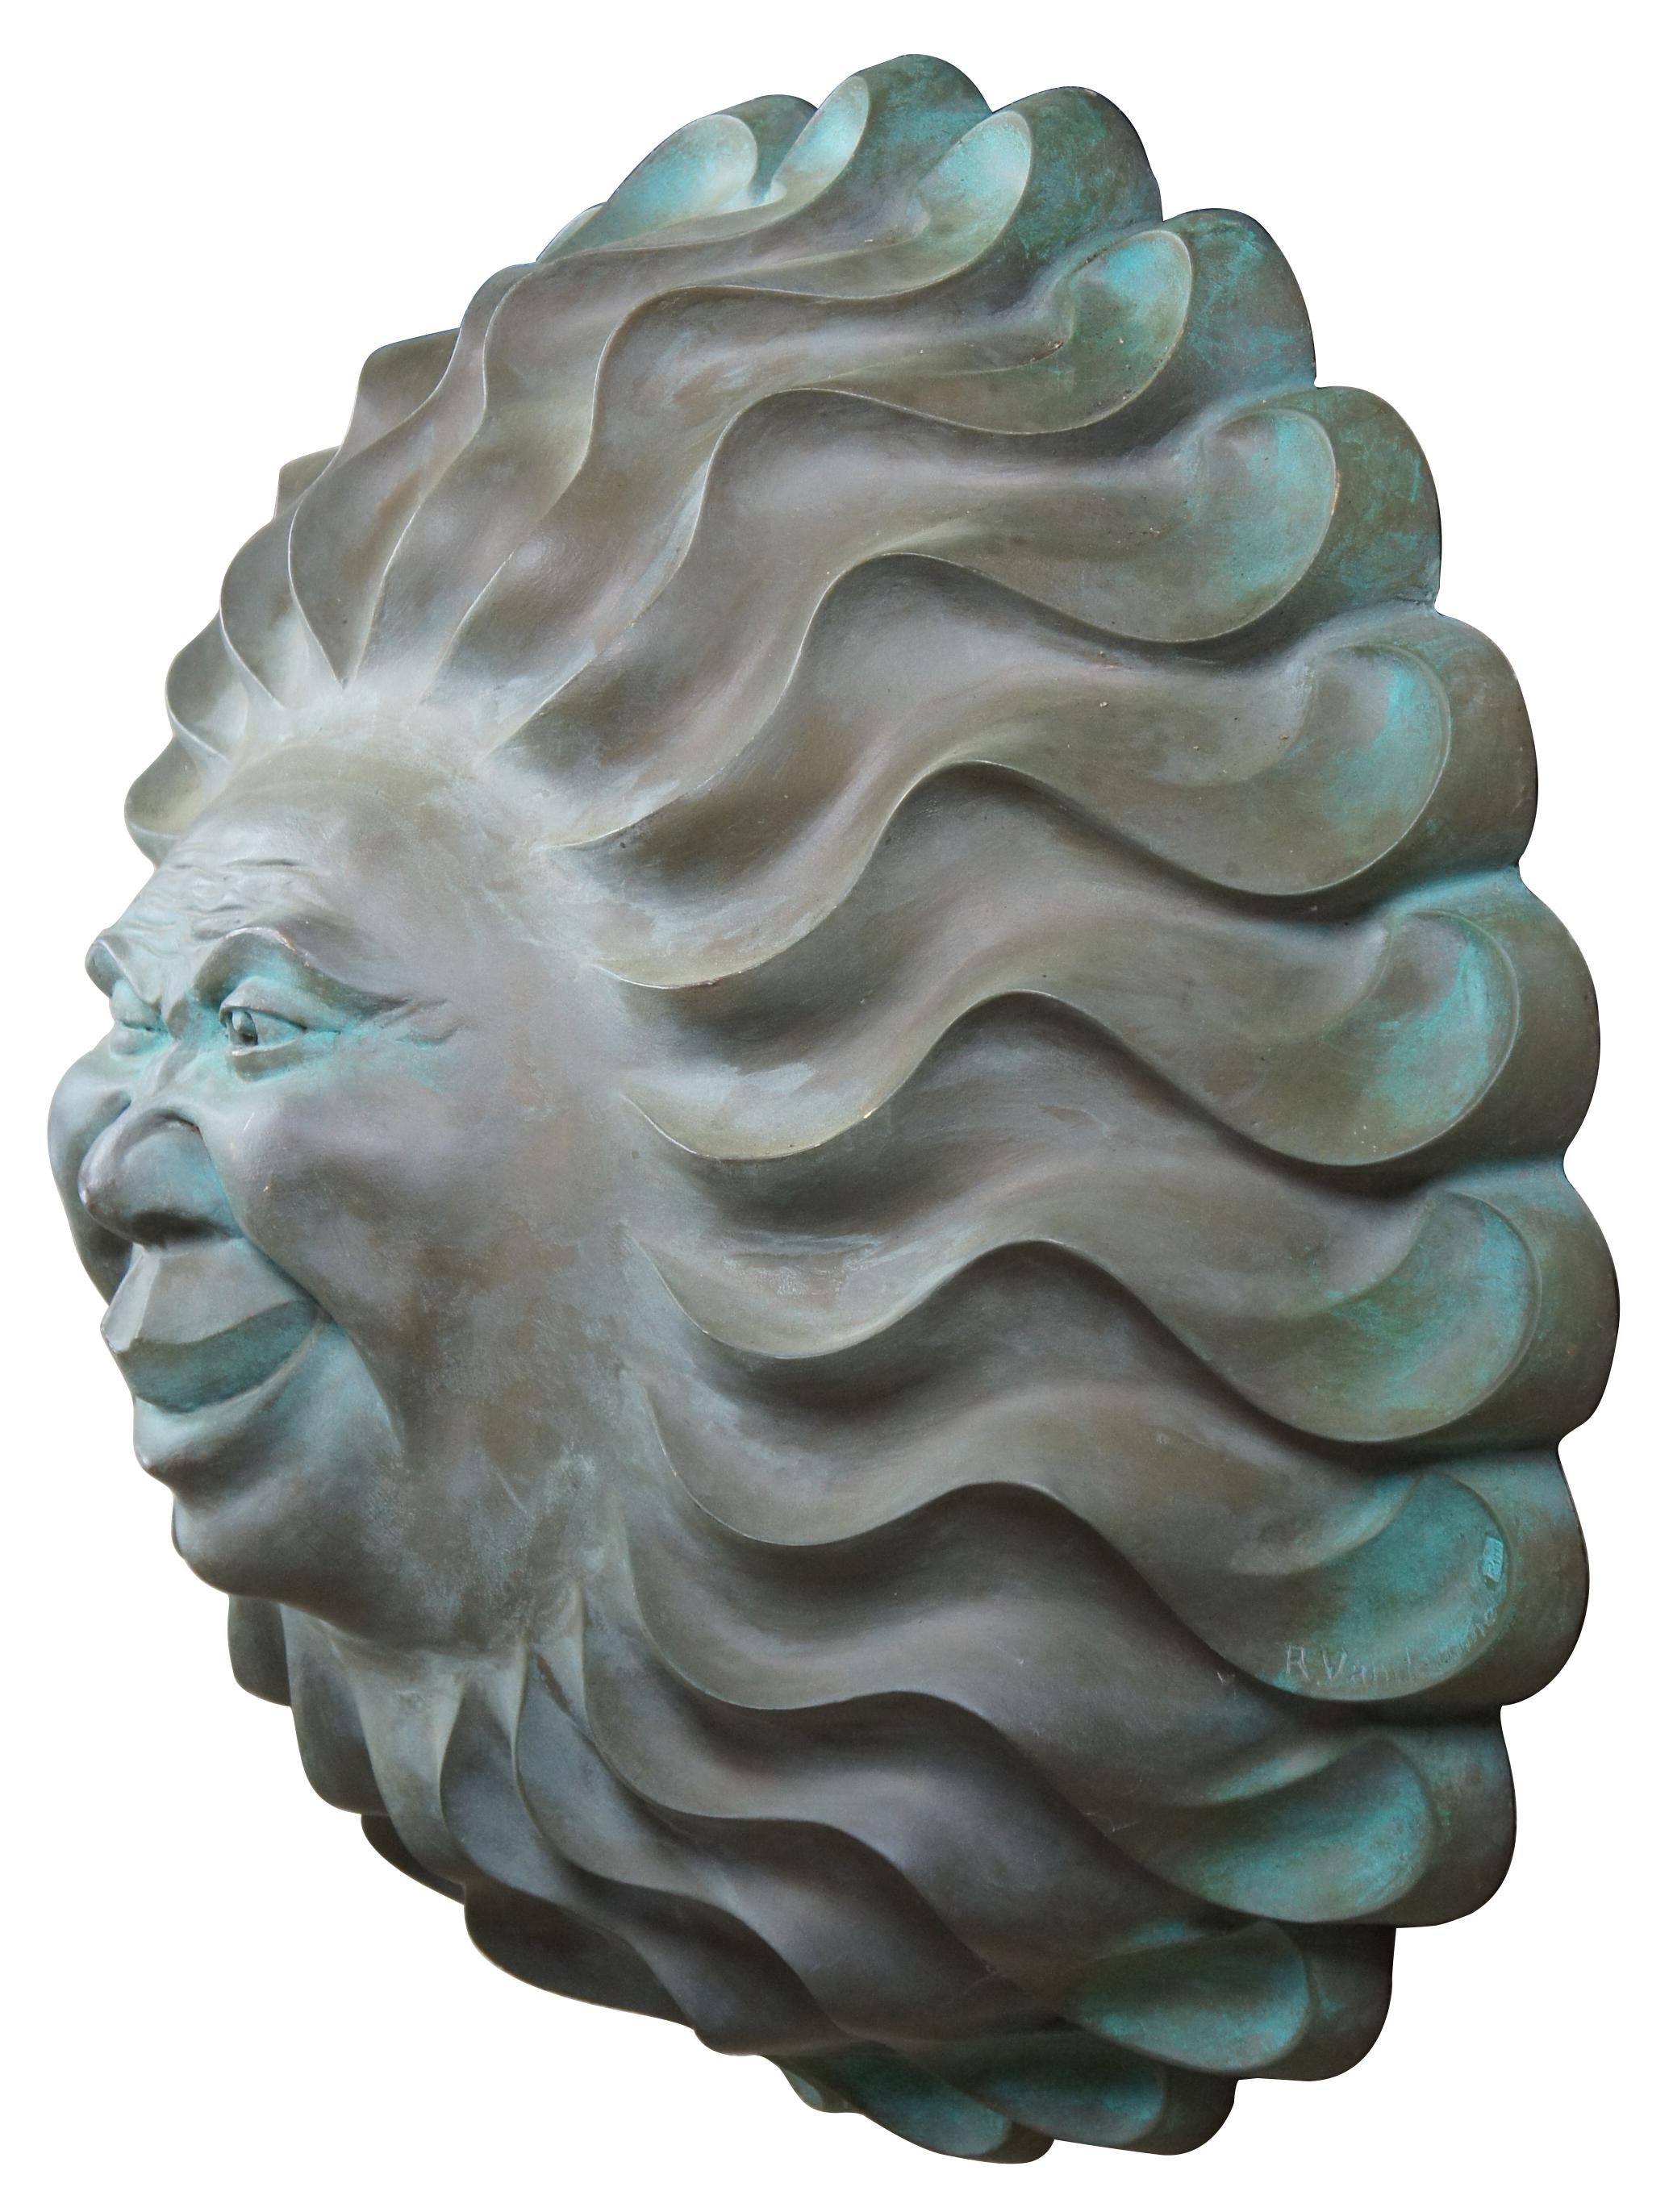 Late 20th century R. Vandamme figural sun face wall art sculpture. Features a large sunburst or starburst shaped plaque featuring a winking and smiling sun or moon faced man. Great for indoor or outdoor use. R. Vandamme was well known for his moon